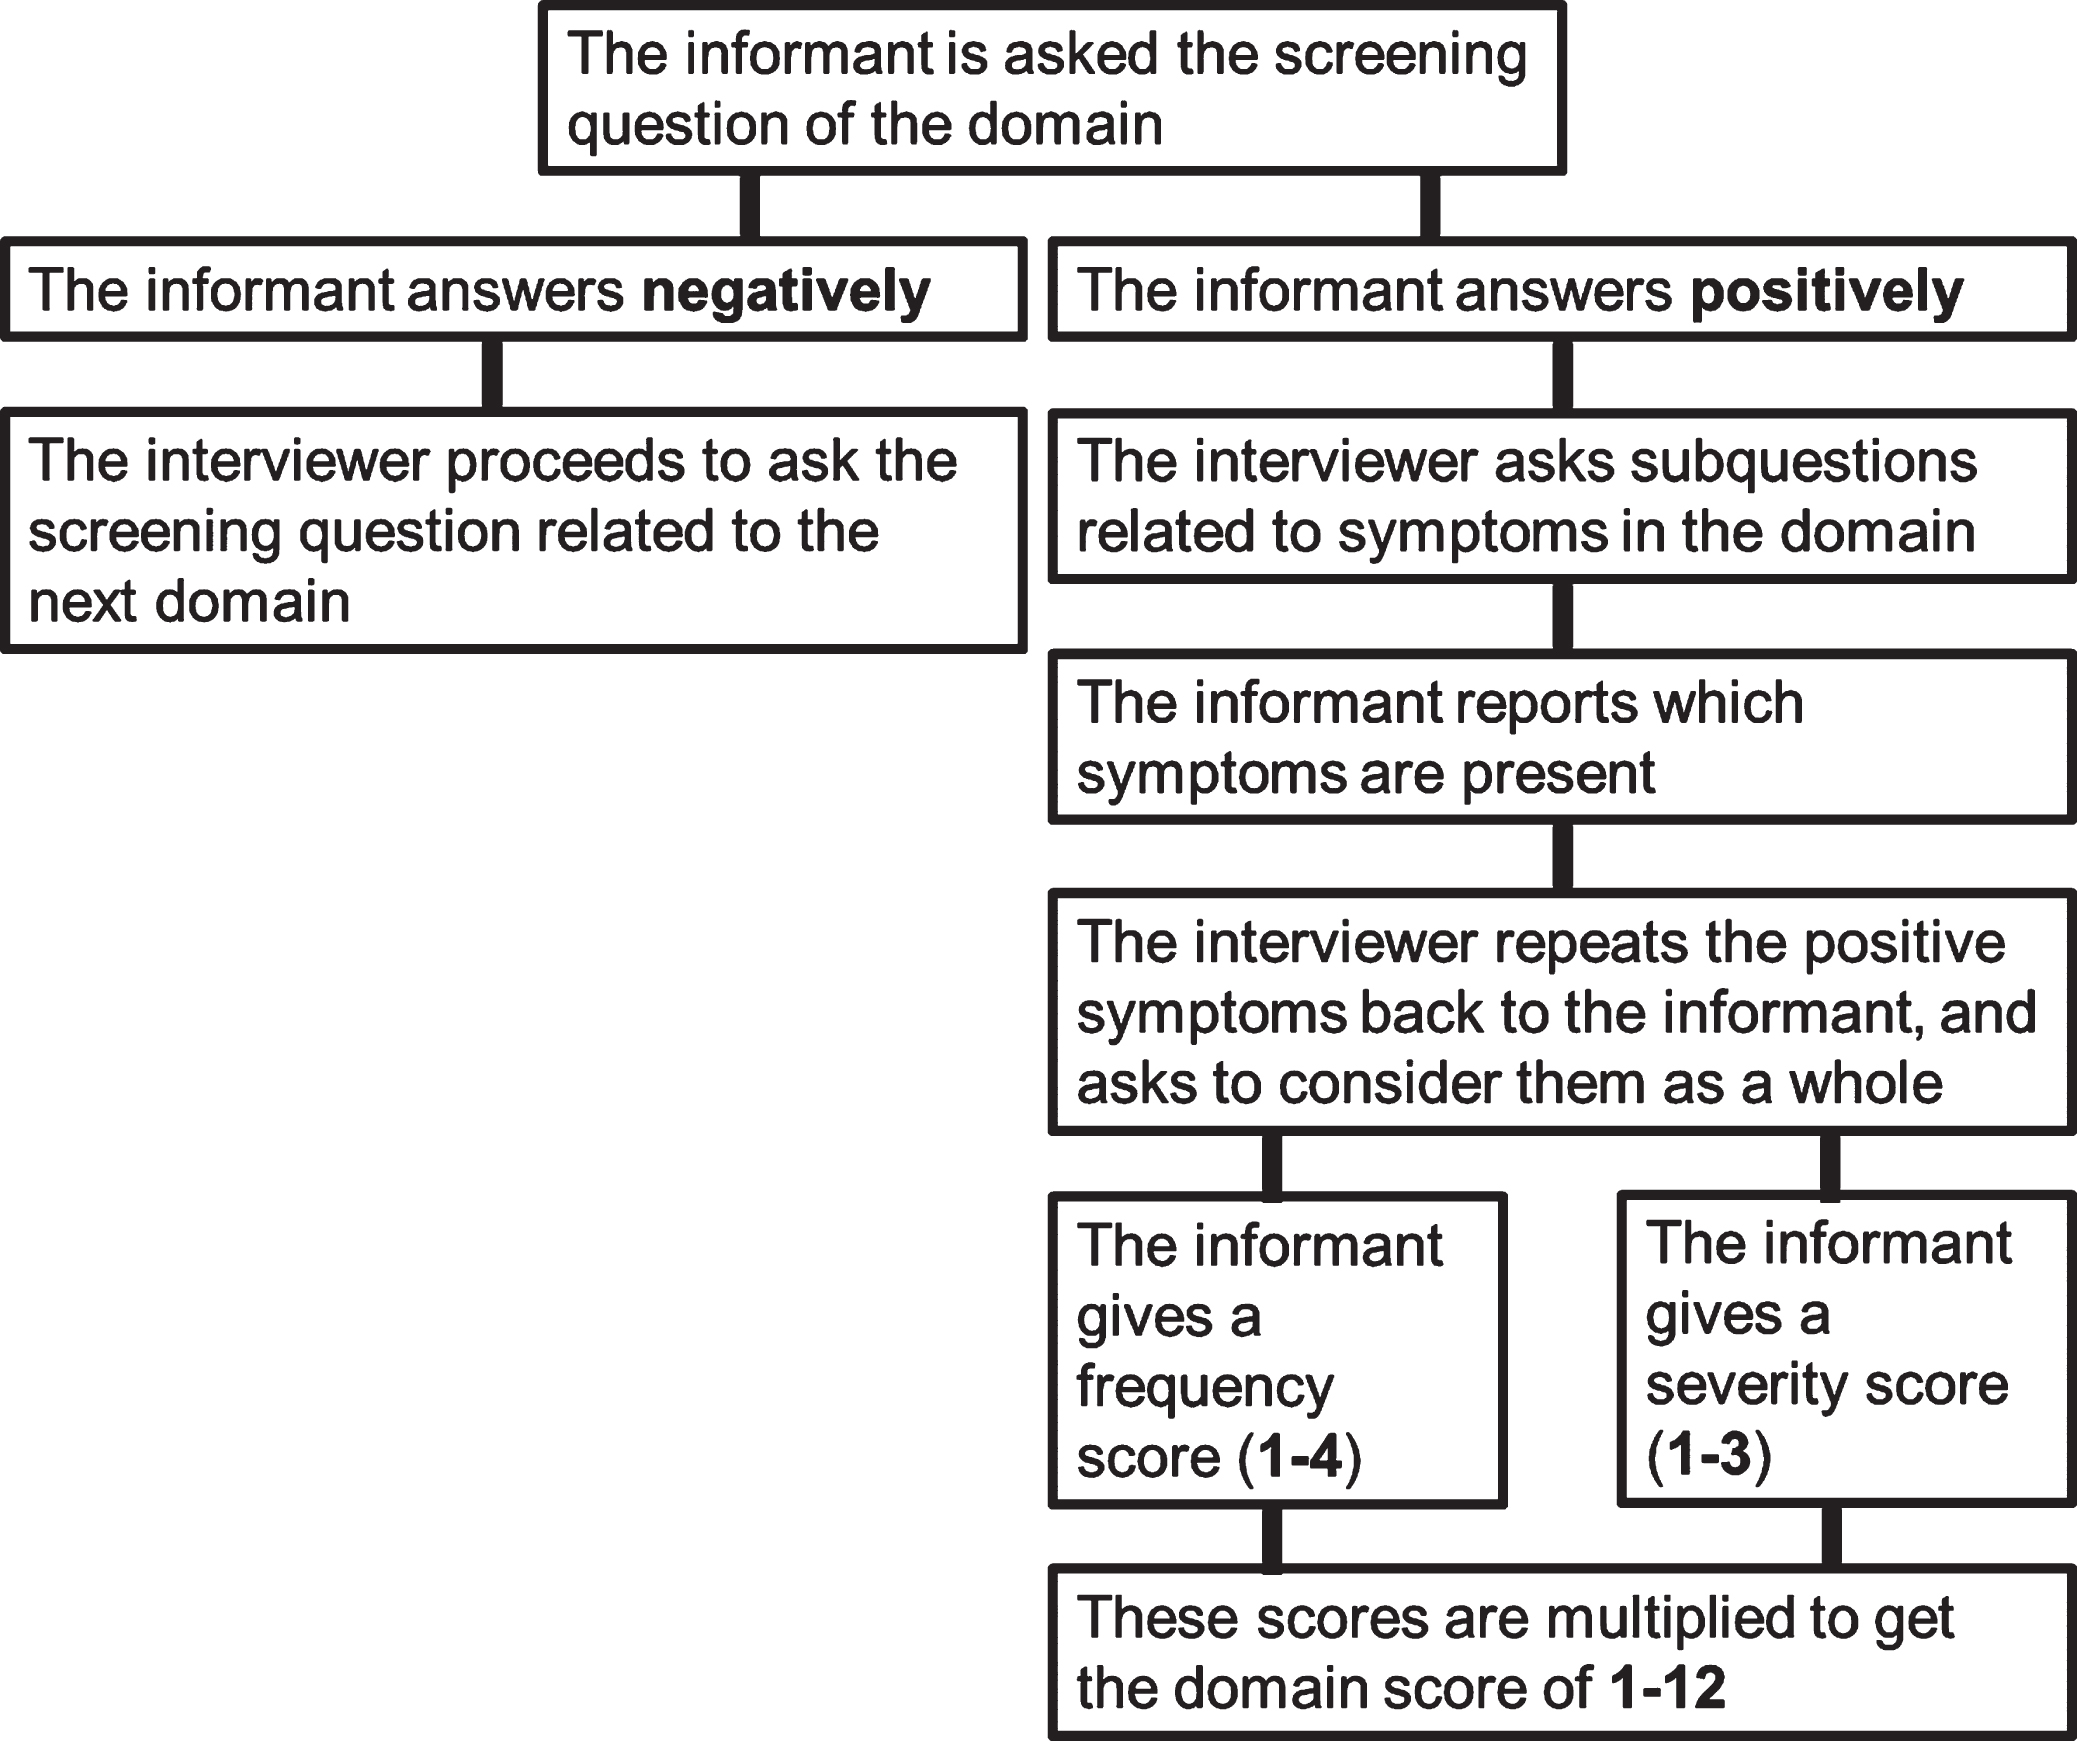 The skip-question and scoring procedure of the Neuropsychiatric Inventory. This procedure is repeated until all domains are covered.